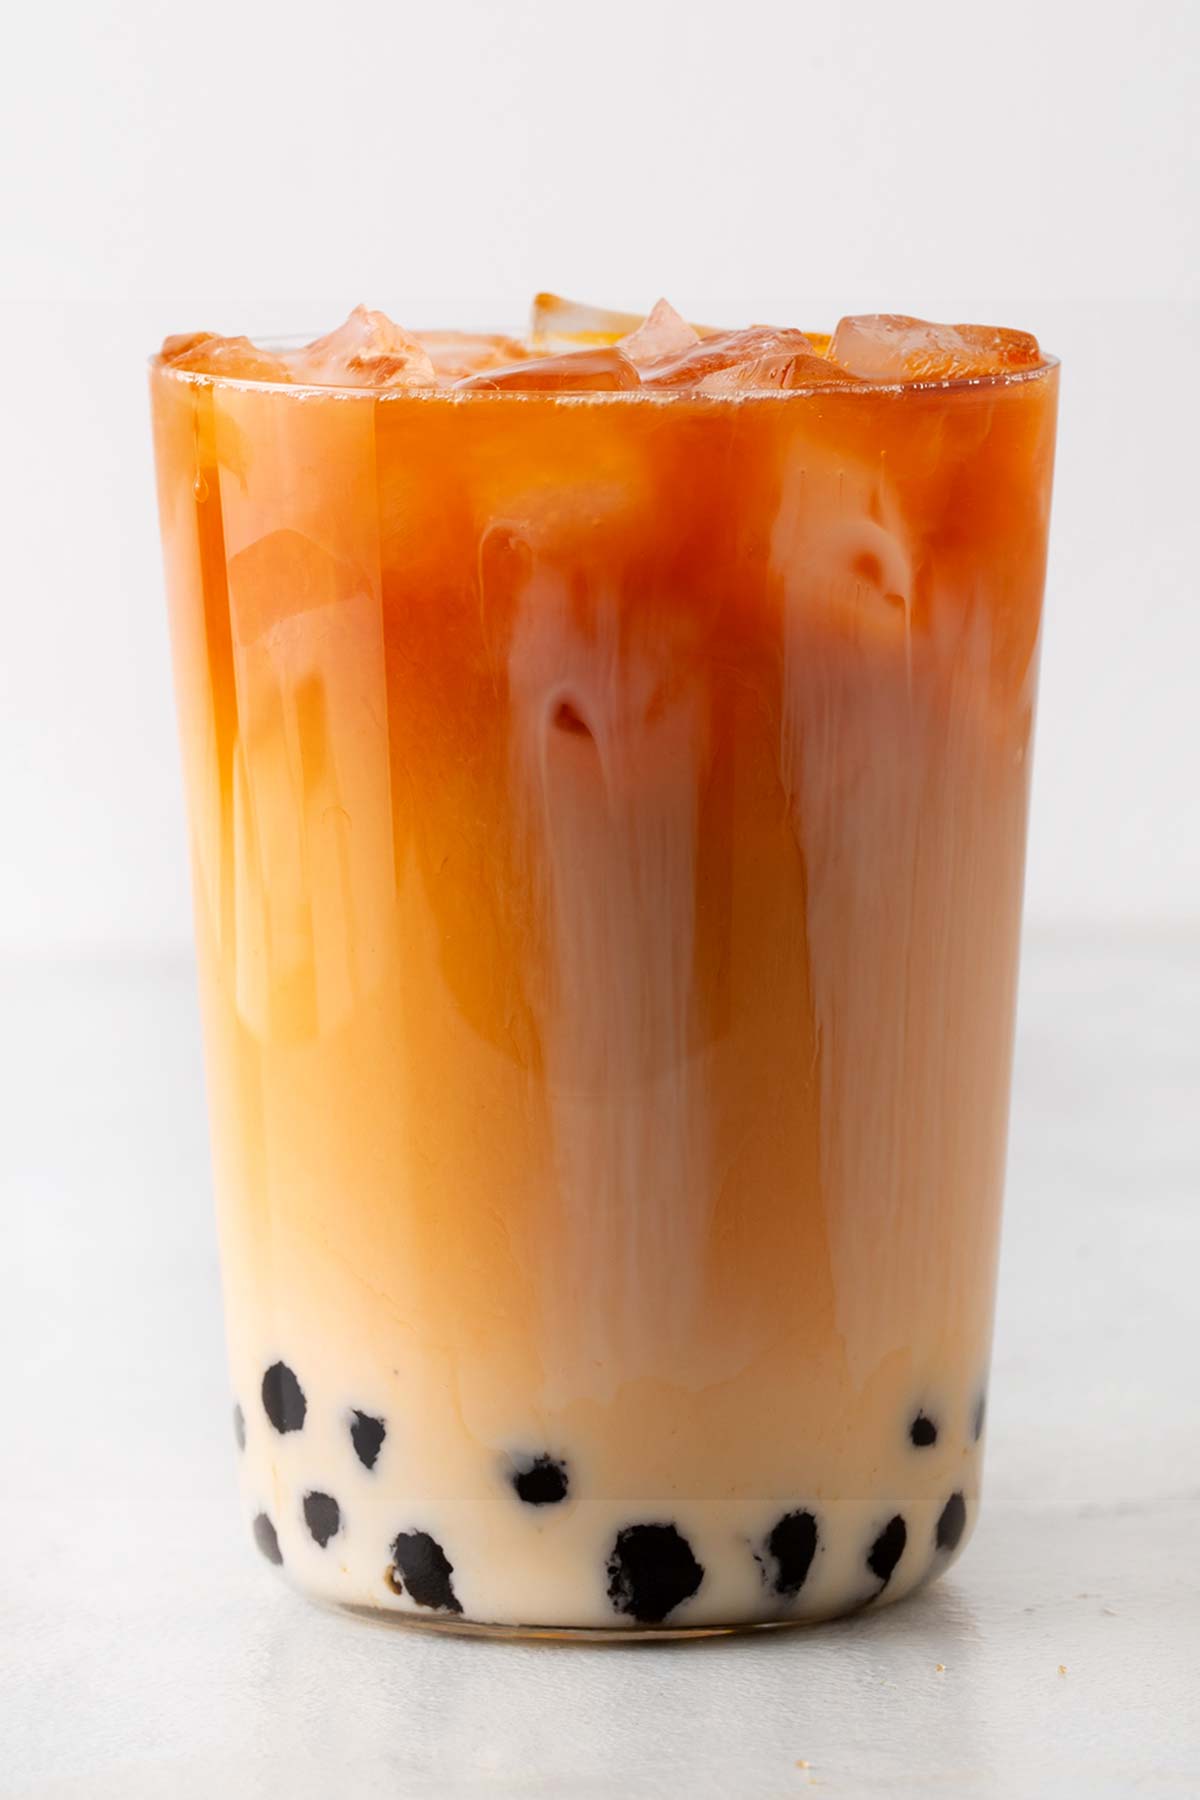 Thai Bubble Tea in a glass with ice, without a straw.